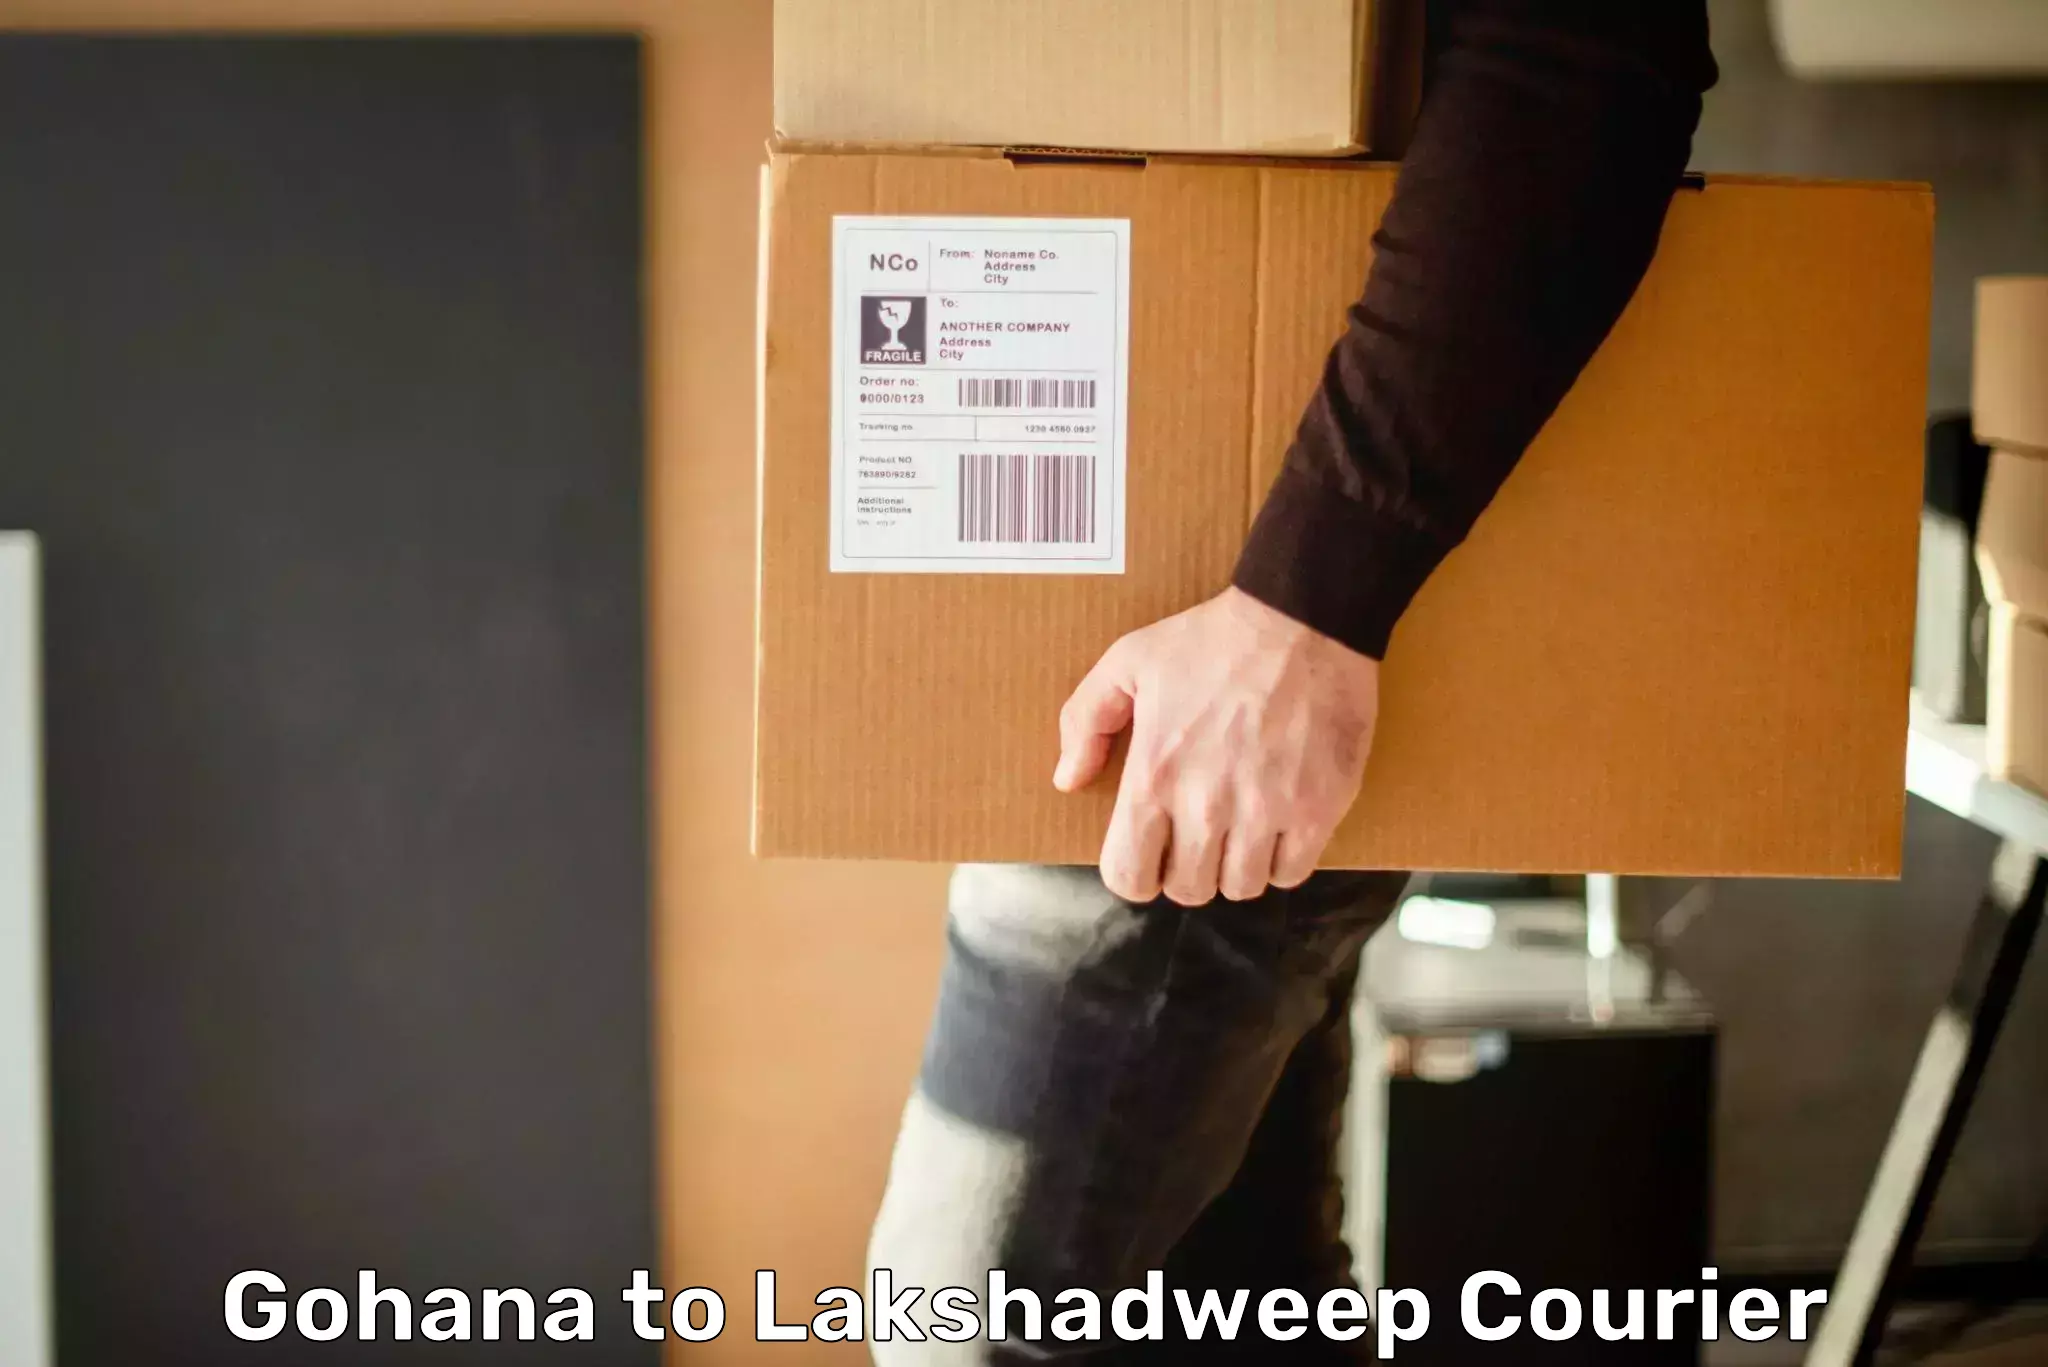 State-of-the-art courier technology Gohana to Lakshadweep